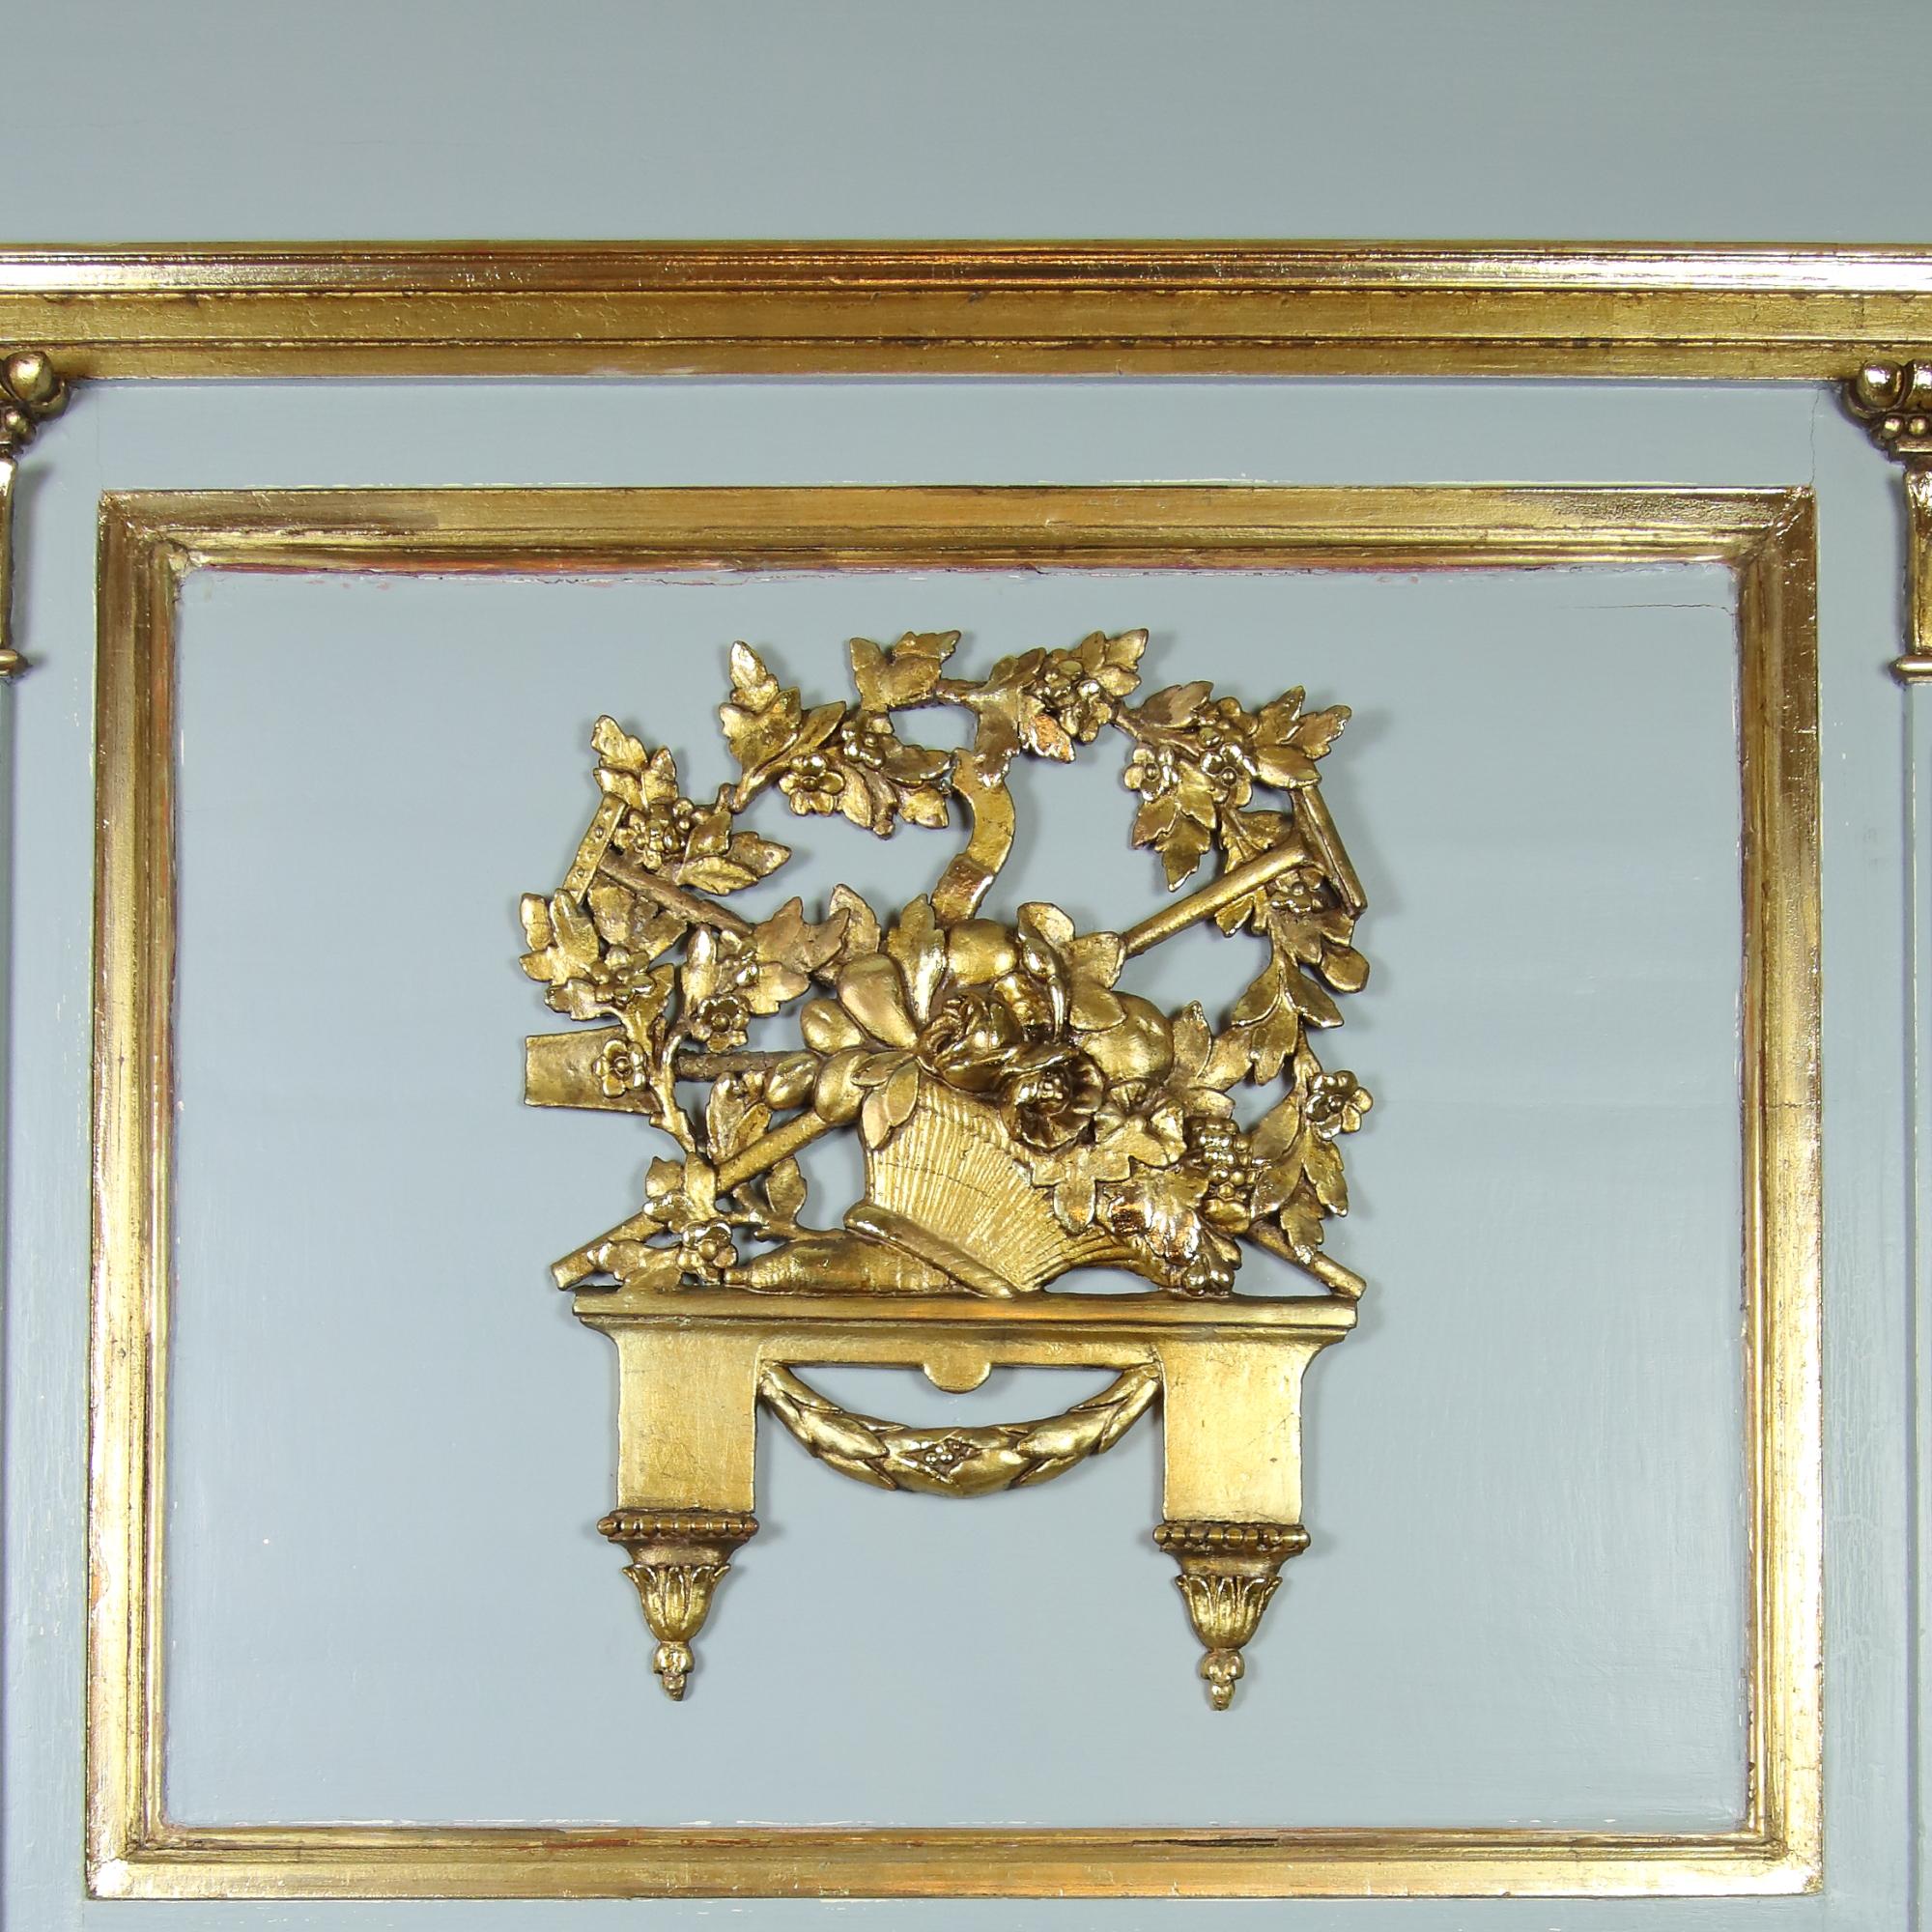 Late 19th century large empire style painted gilt wood wall mirror or trumeau

Large rectangular mirror with architectural structure: the central field, consisting of a lower mirror field and upper decorative cartouche, is flanked by a pair of